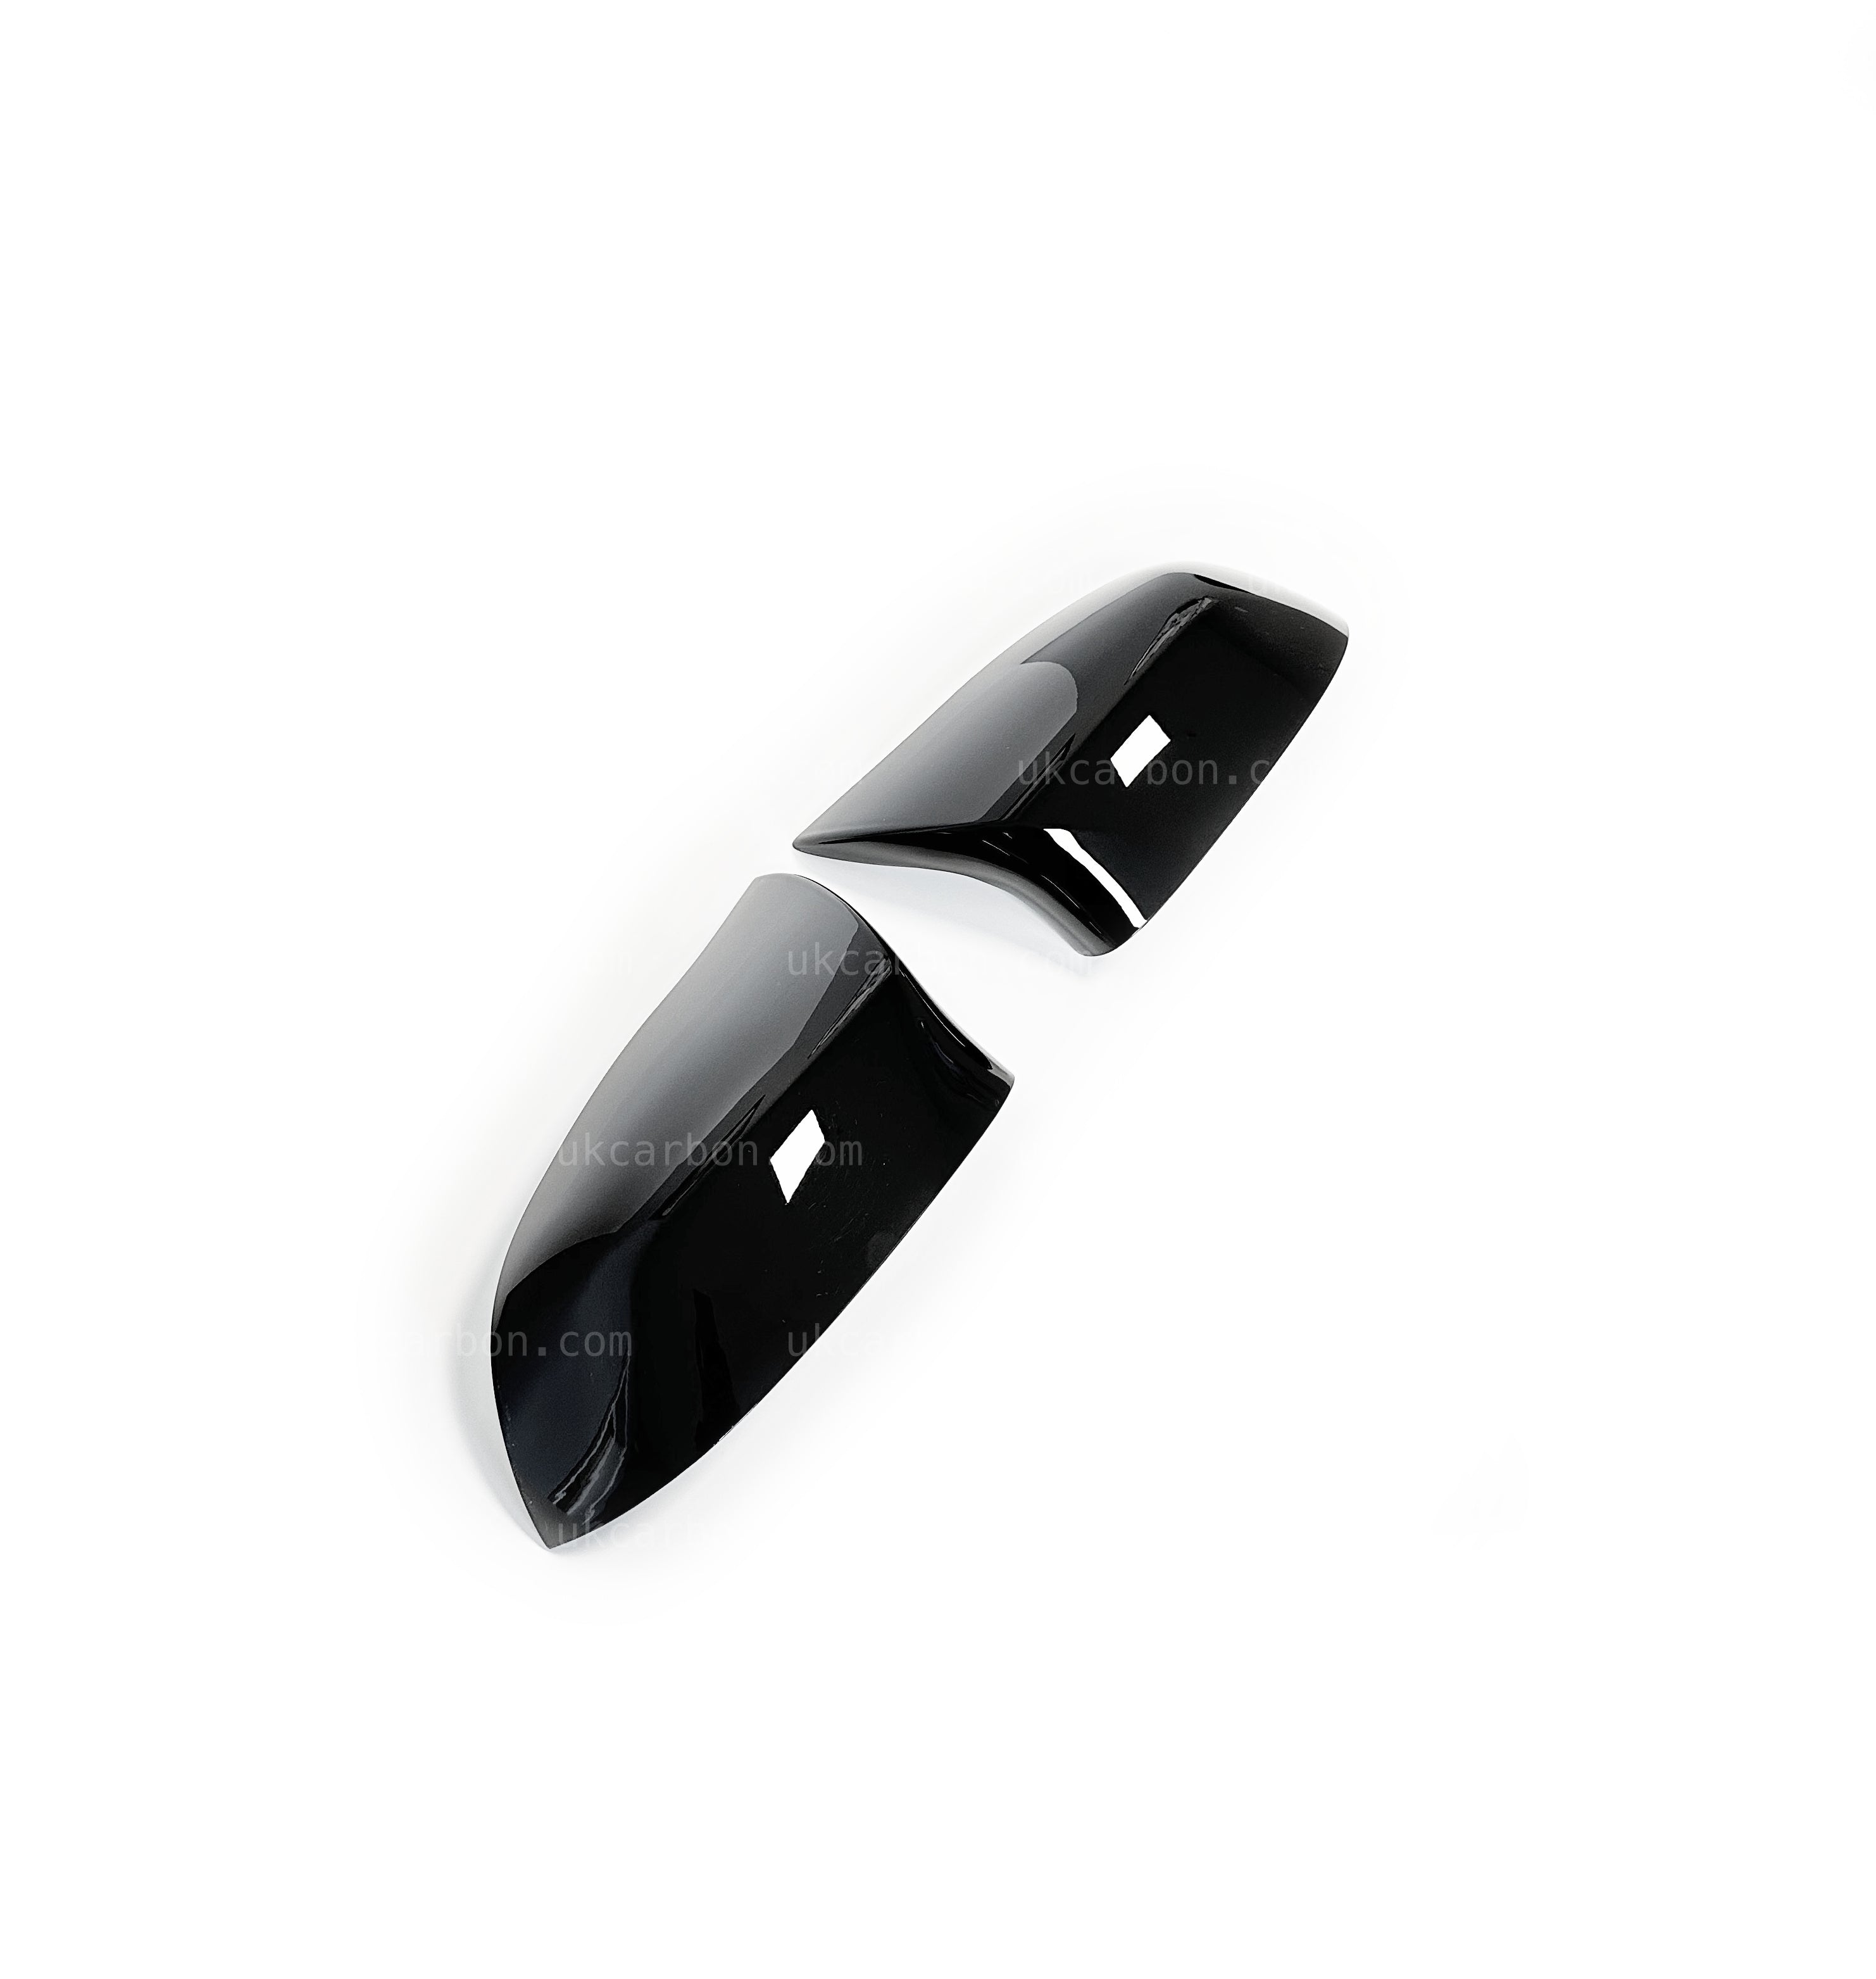 BMW X5 F15 Gloss Black M Performance Wing Mirror Cover Replacements by UKCarbon